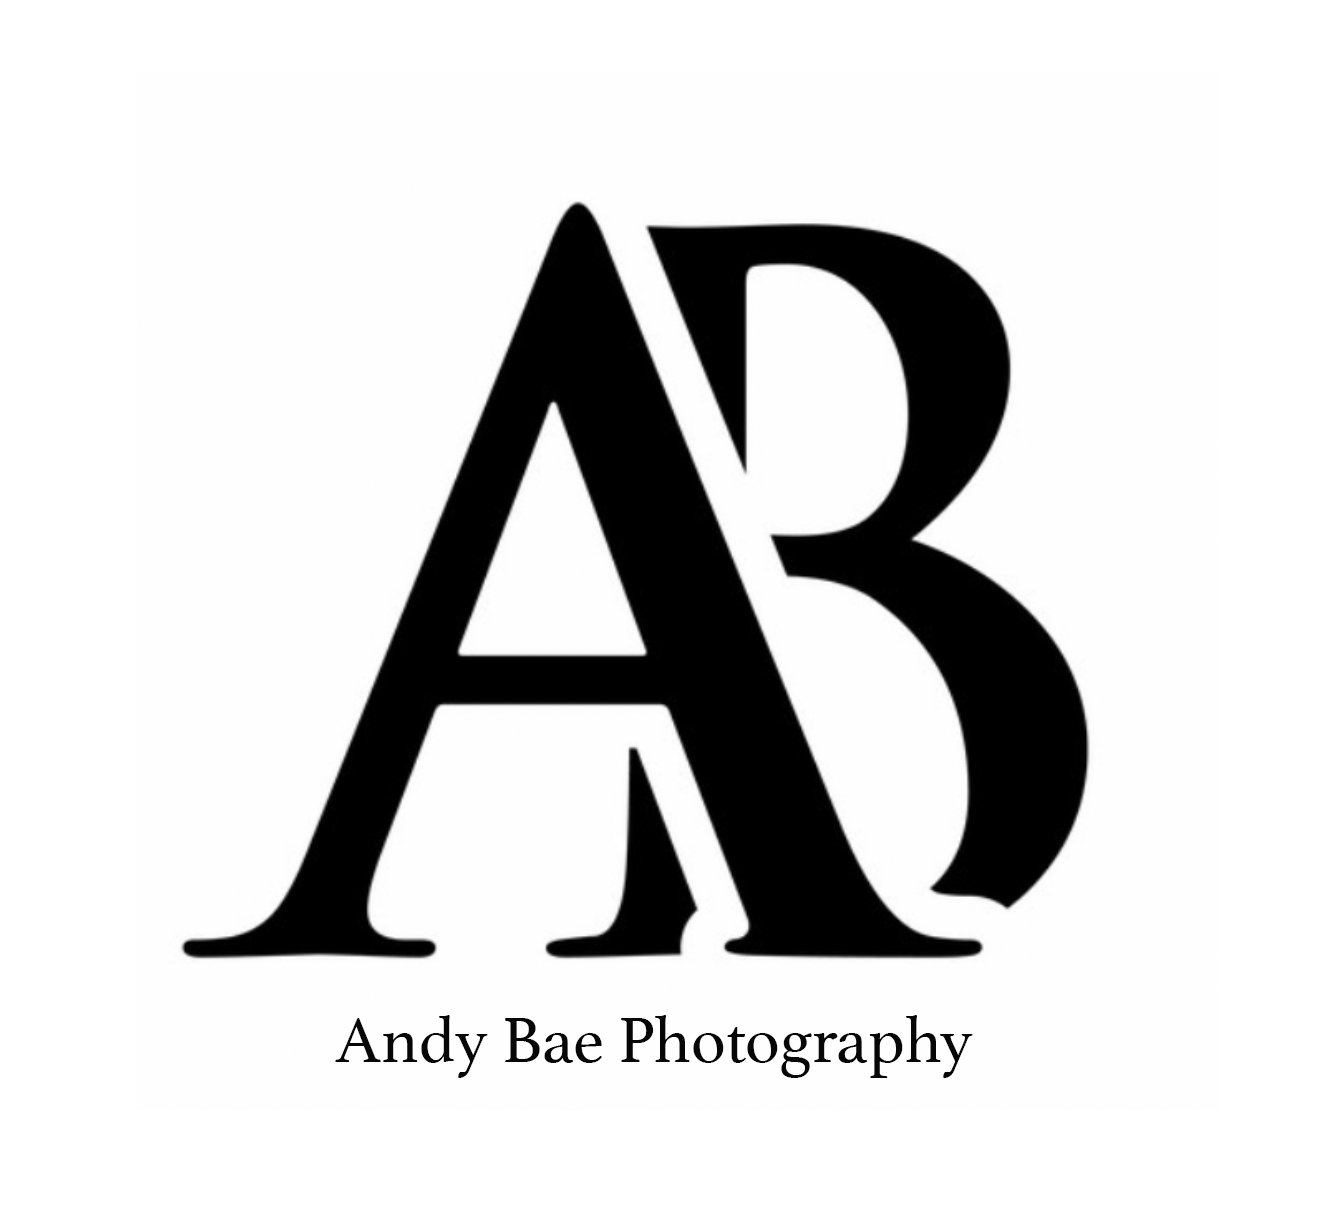 Andy Bae Photography